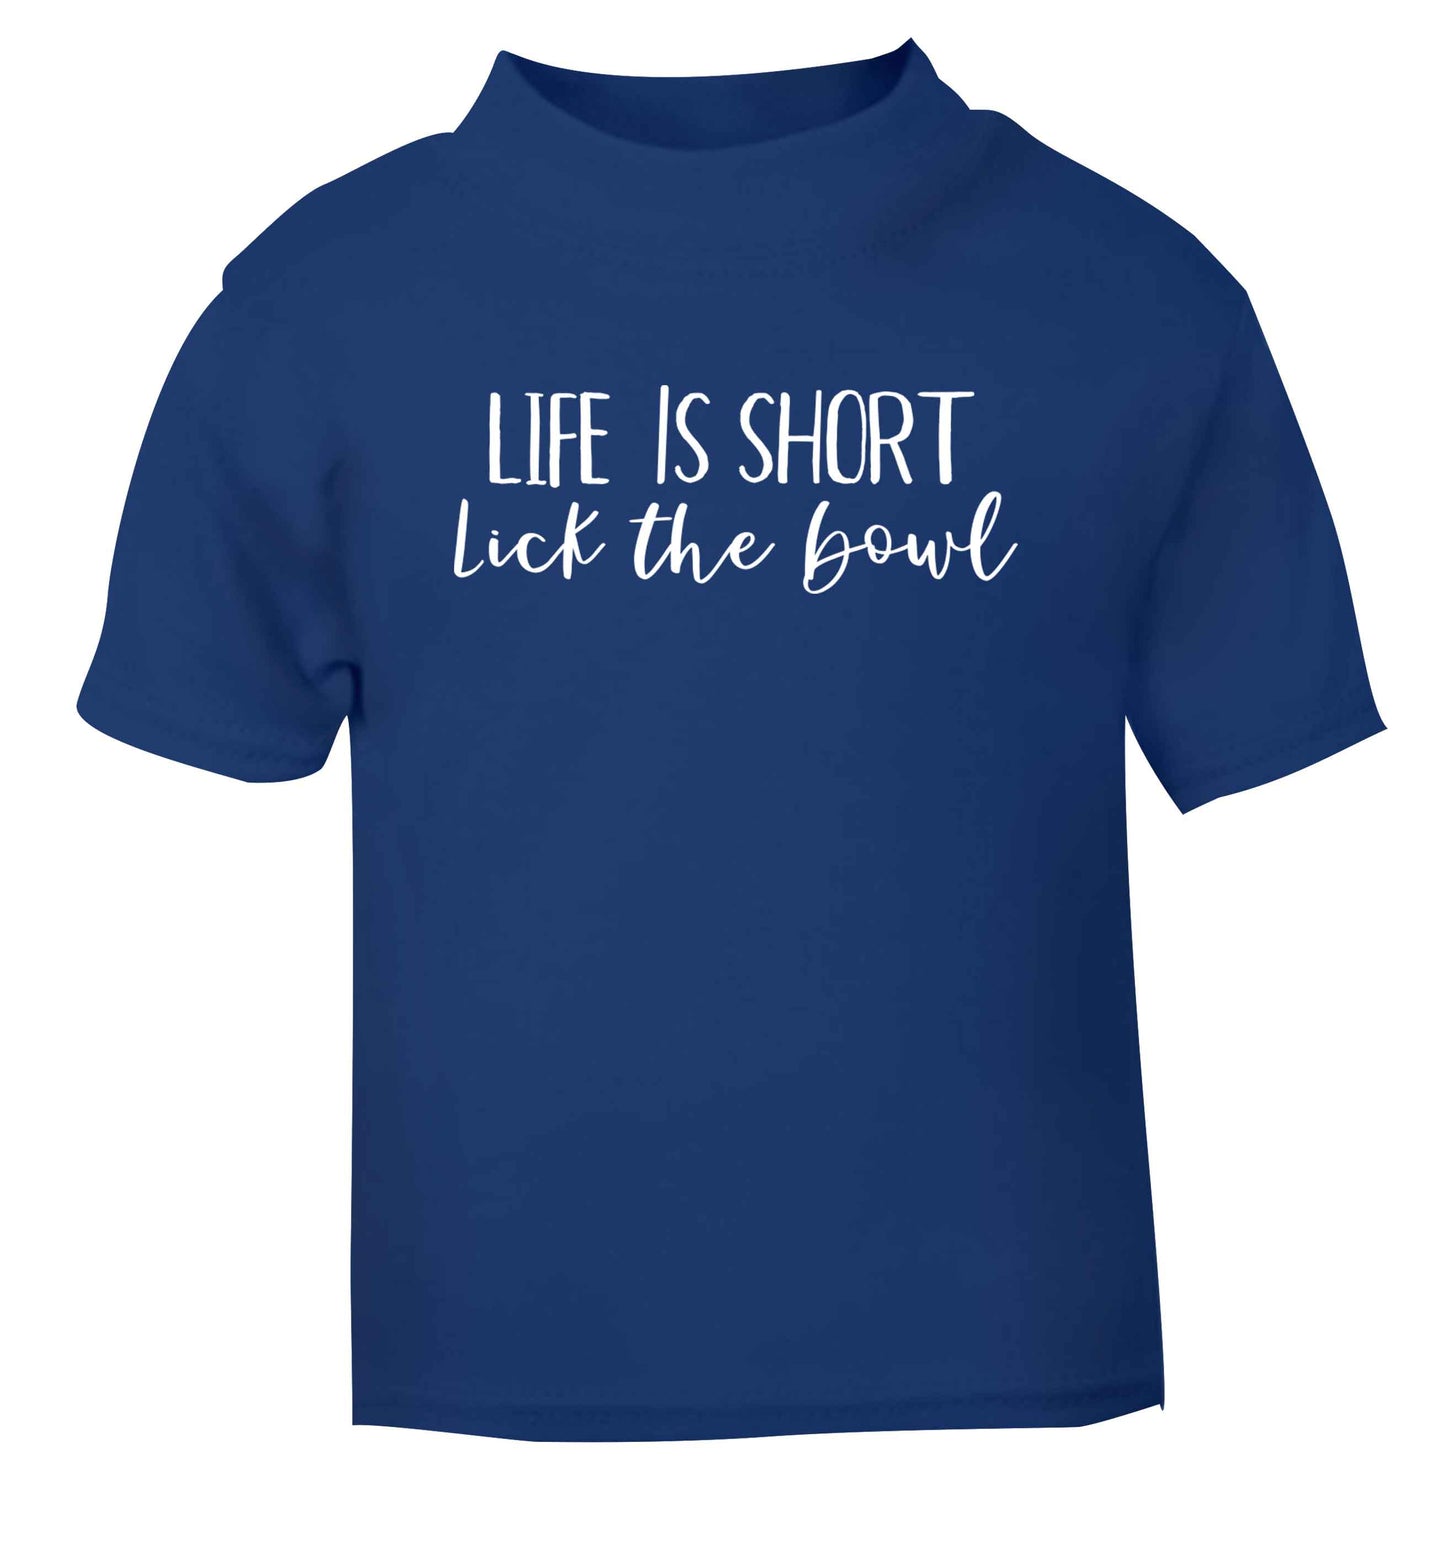 Life is short lick the bowl blue Baby Toddler Tshirt 2 Years